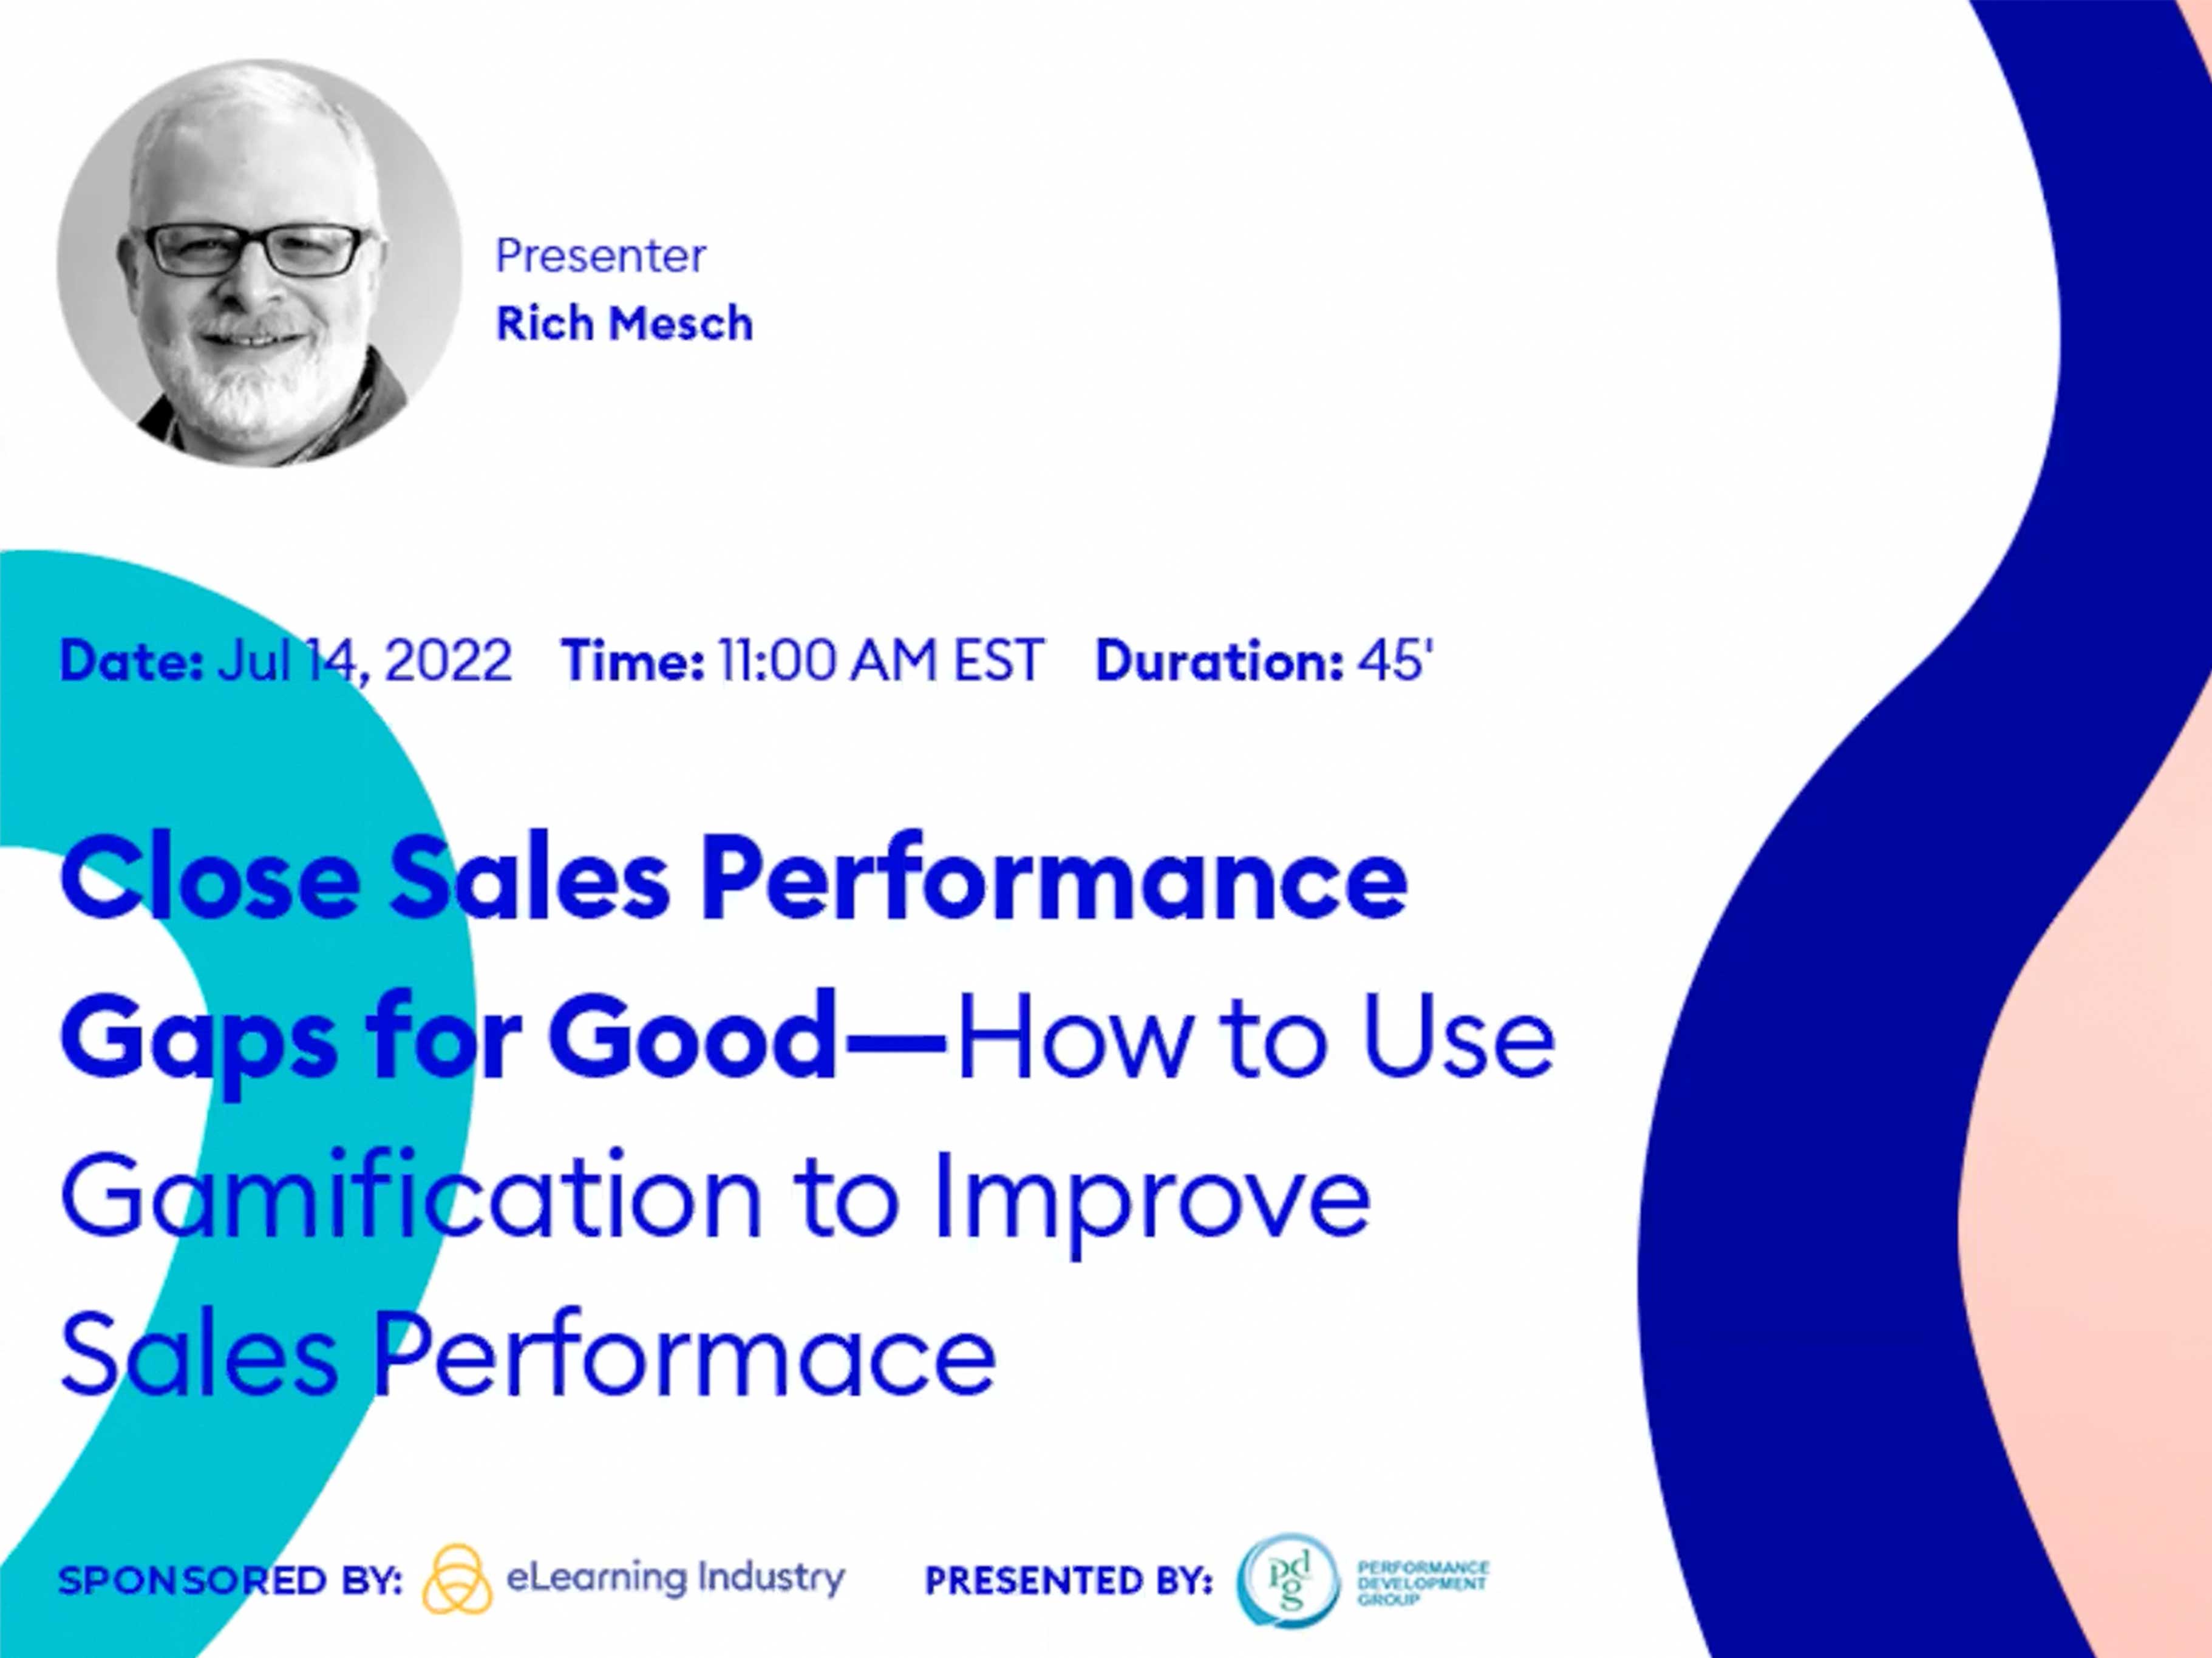 Close Sales Performance Gaps for Good—How to Use Gamification to Improve Sales Performance